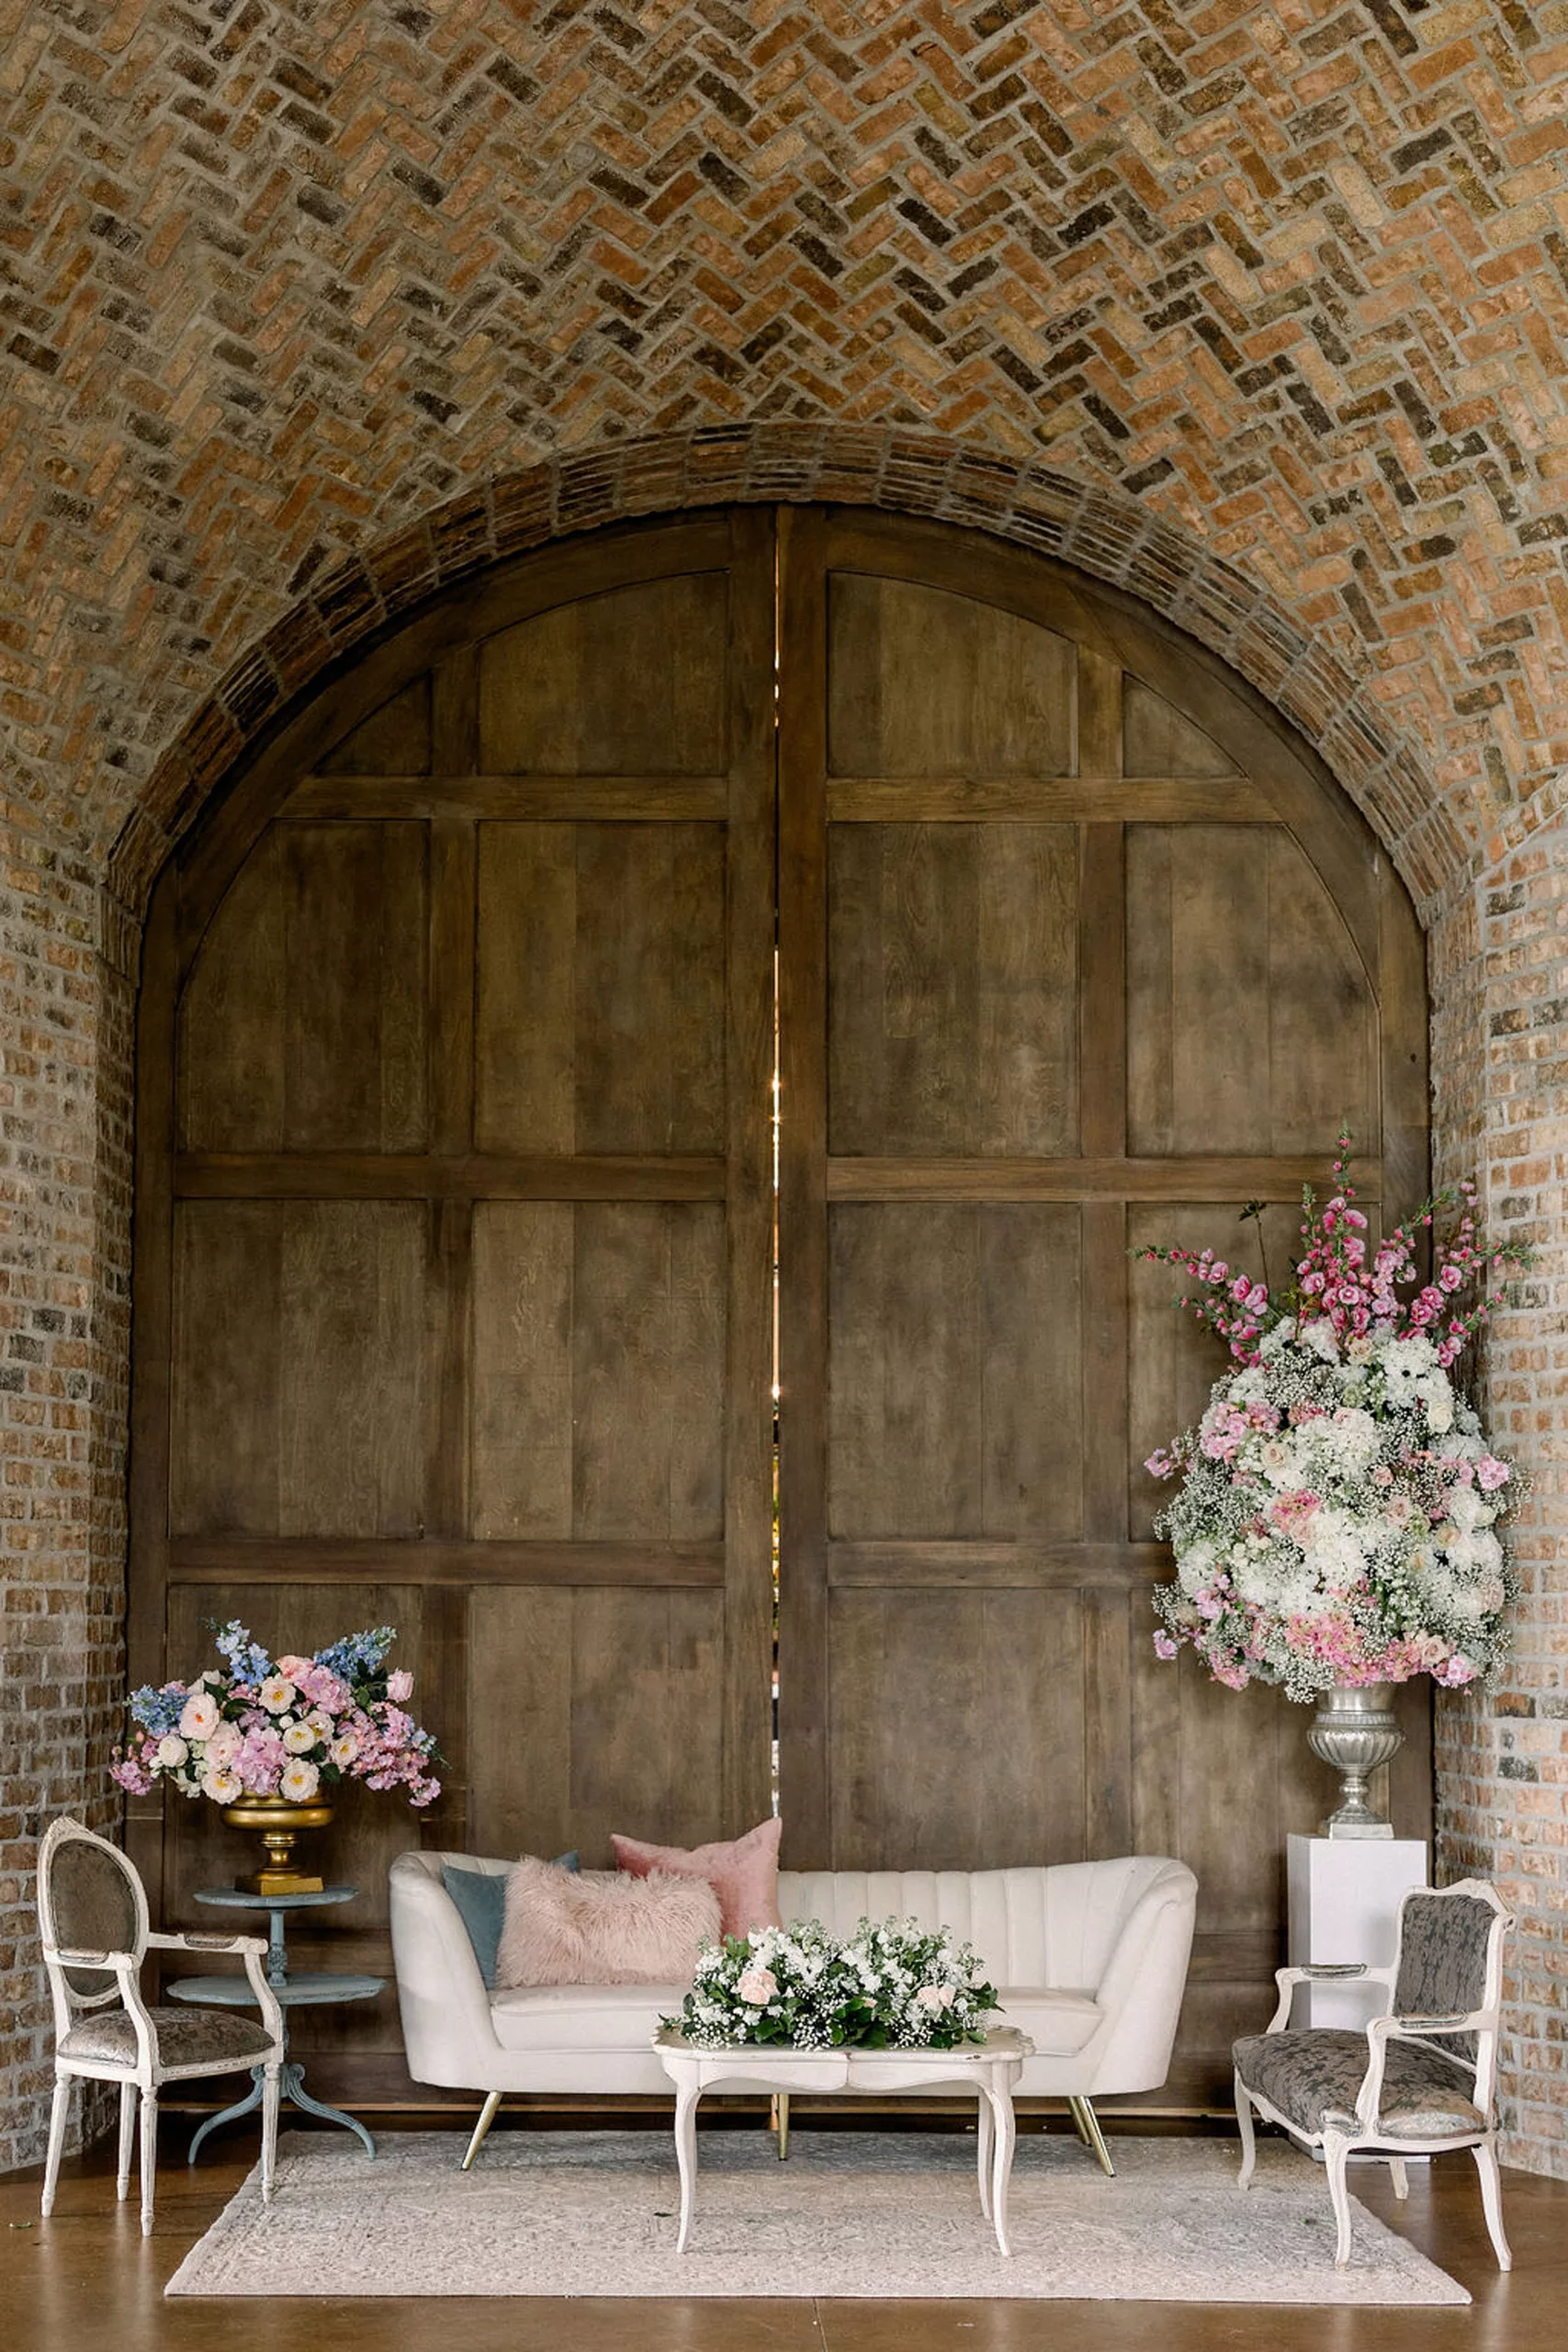 Details of a couch and antique chairs set in a large wooden doorway in a brick room with large floral arrangements at the iron manor wedding venue